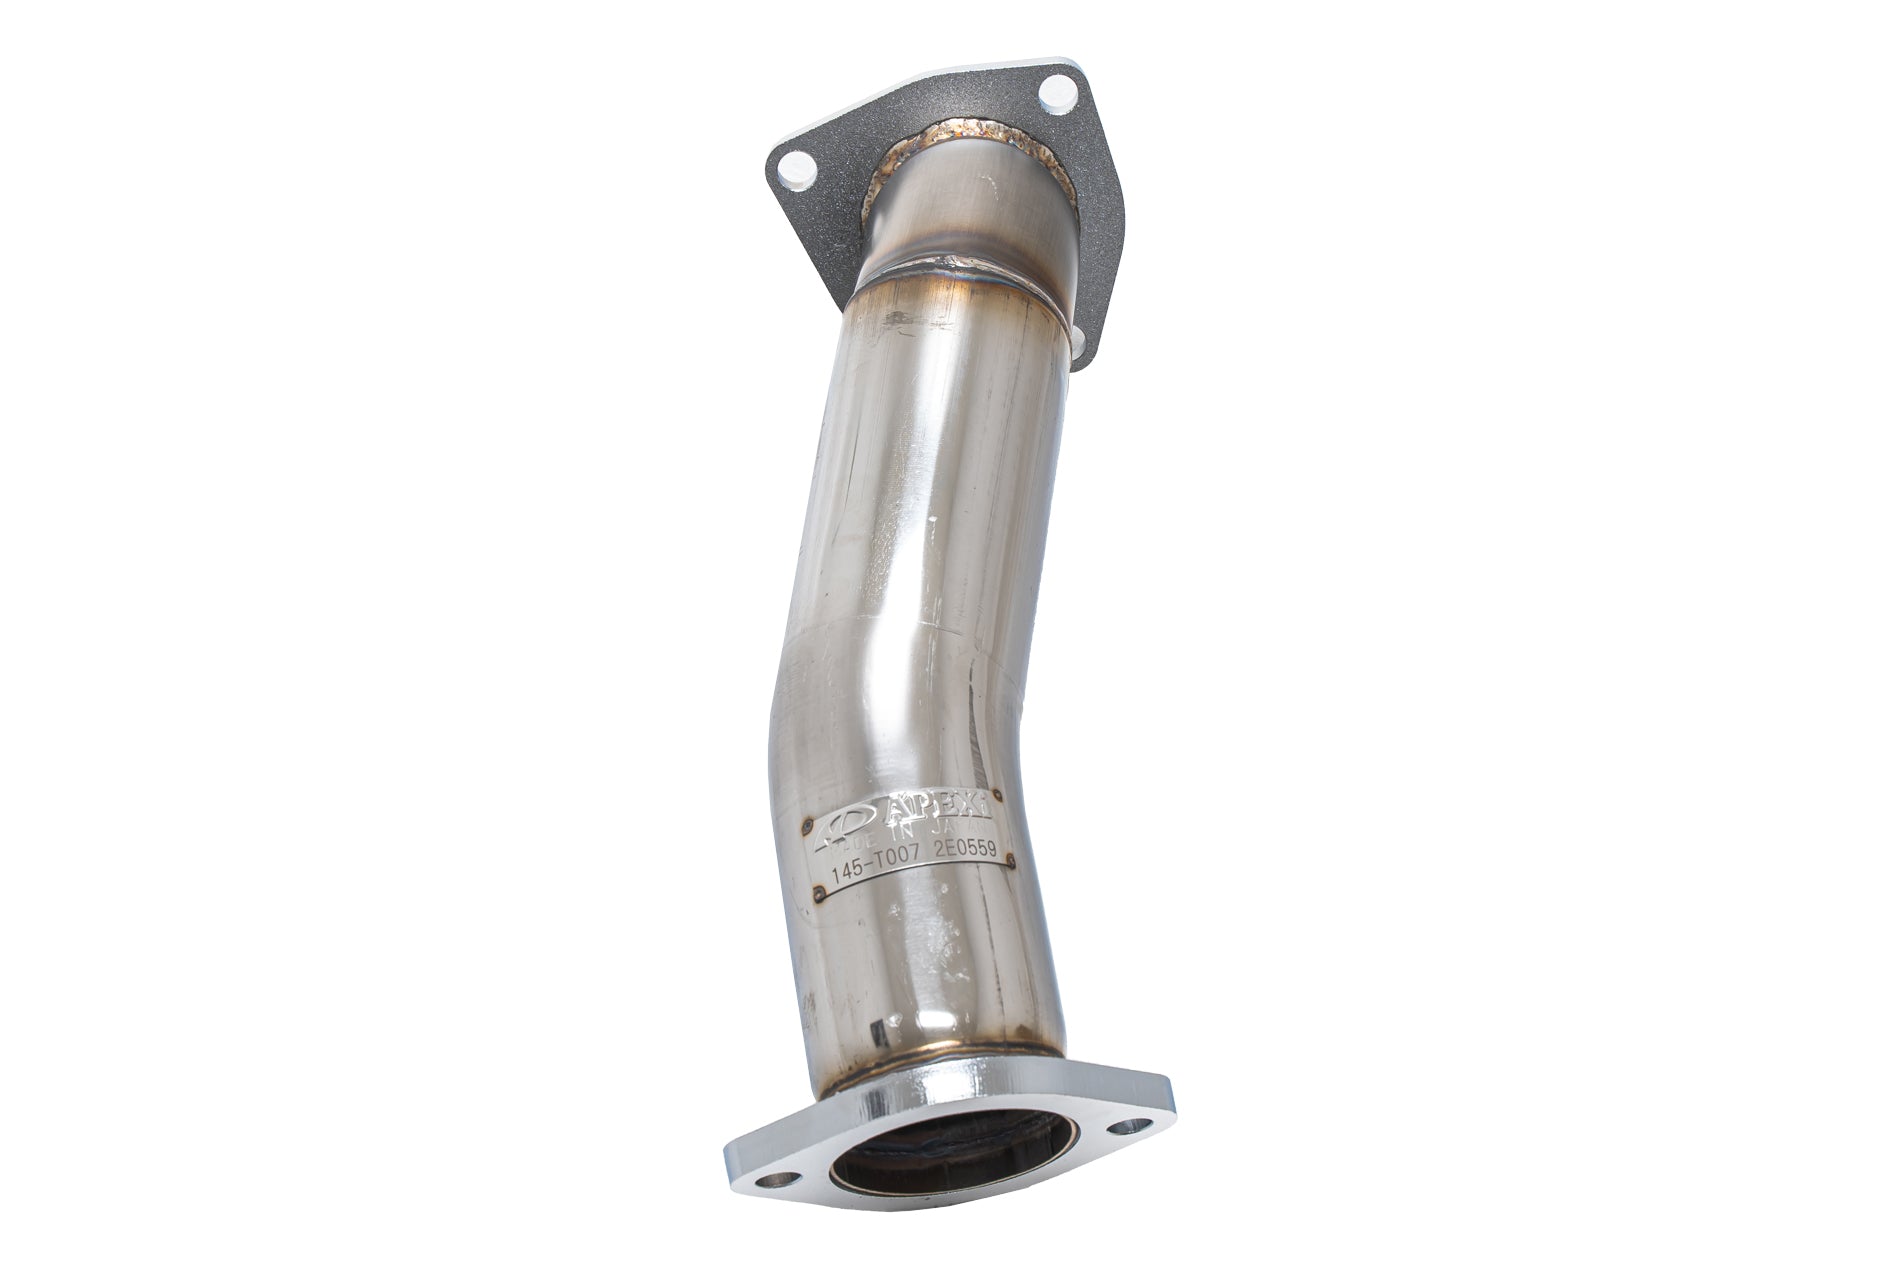 GT Downpipe - Toyota Mark 2 / Chaser / Cresta (JZX100)